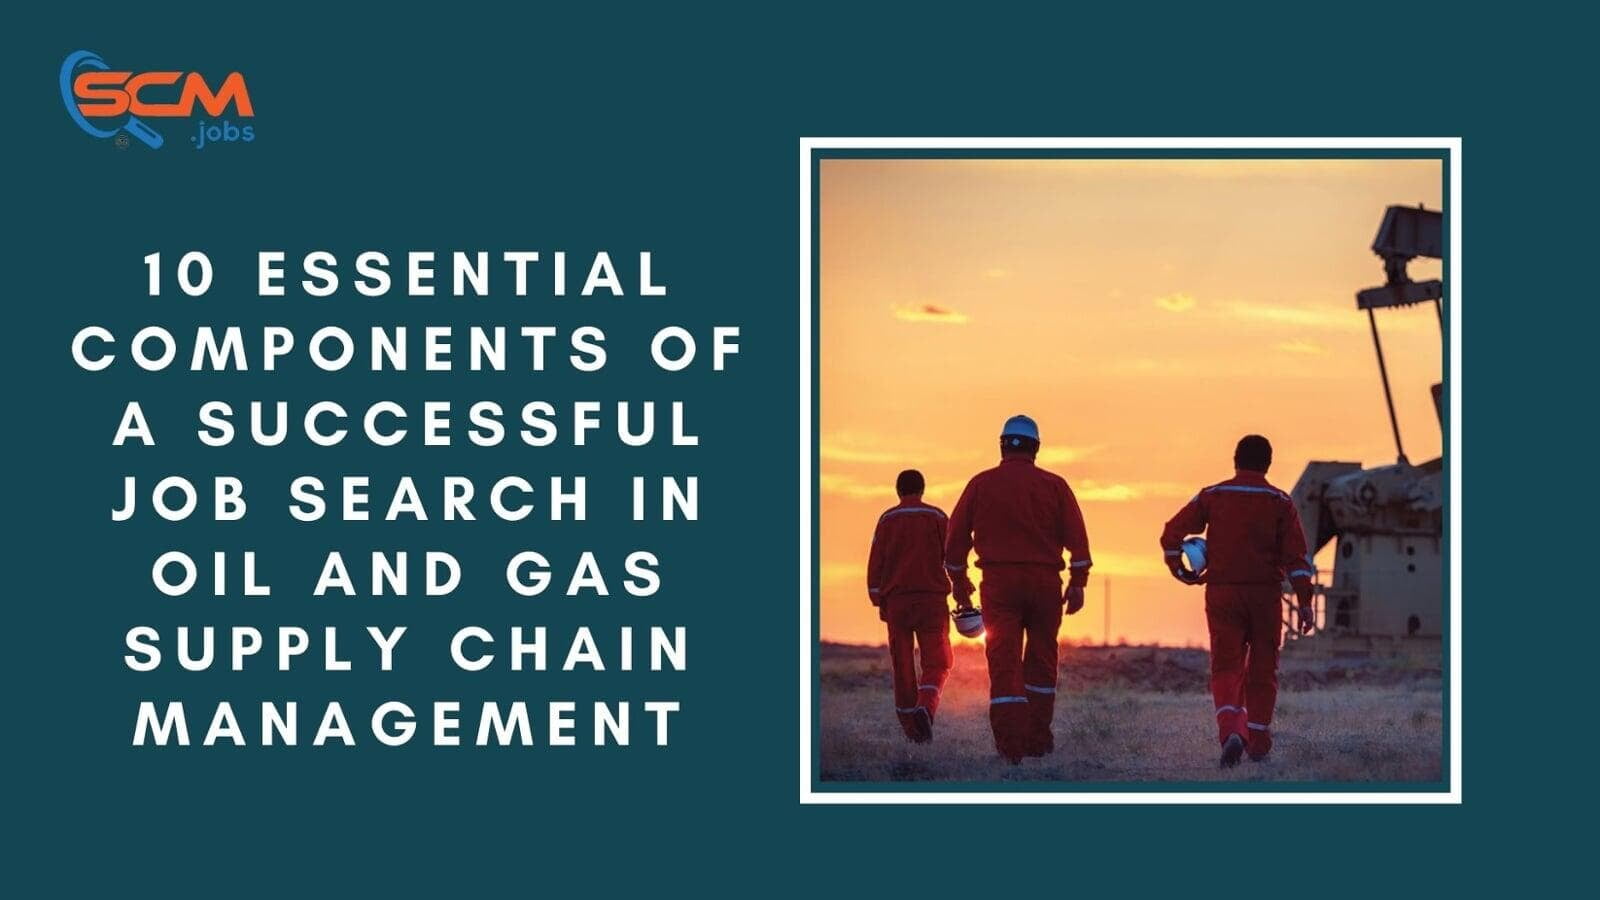 10 Essential Components of a Successful Job Search in Oil and Gas Supply Chain Management